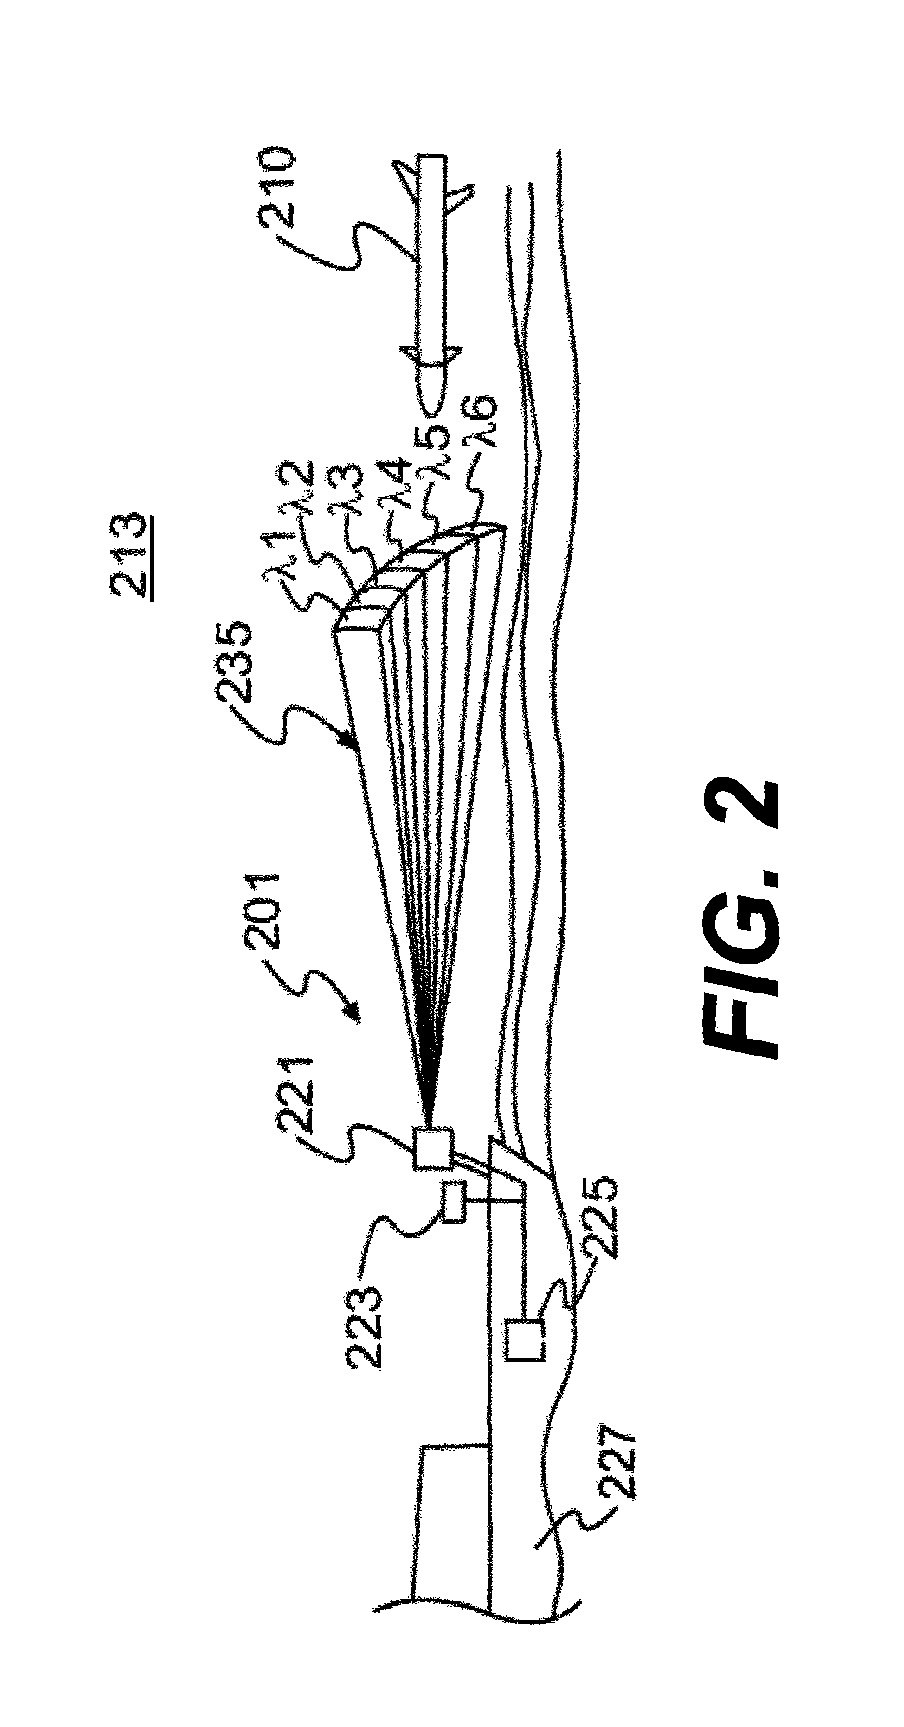 Apparatus and method for spatial encoding of a search space